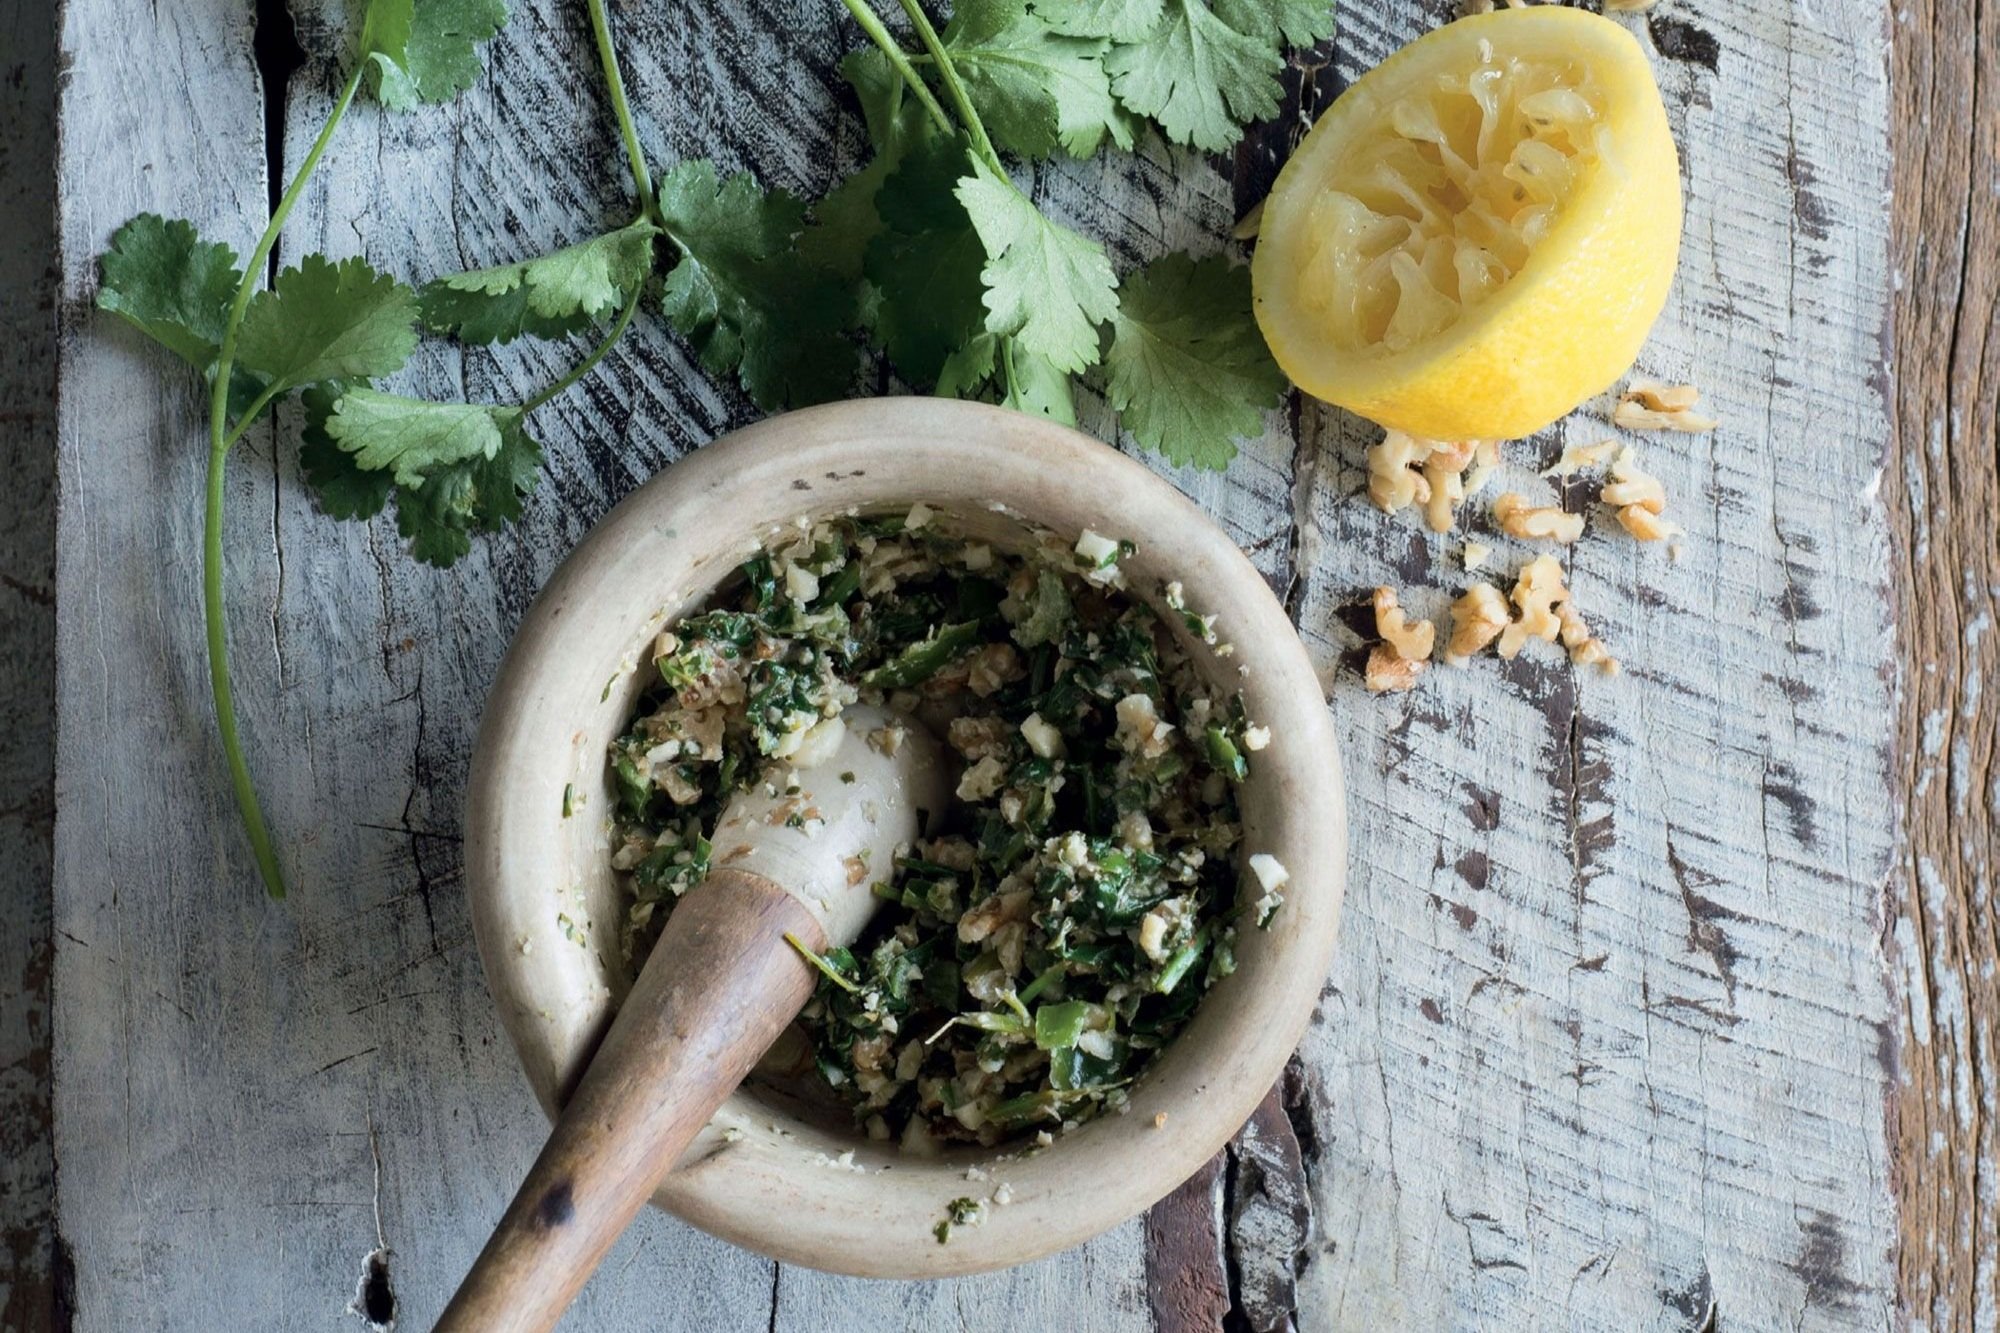 Pesto and beyond: summer herb sauces explained